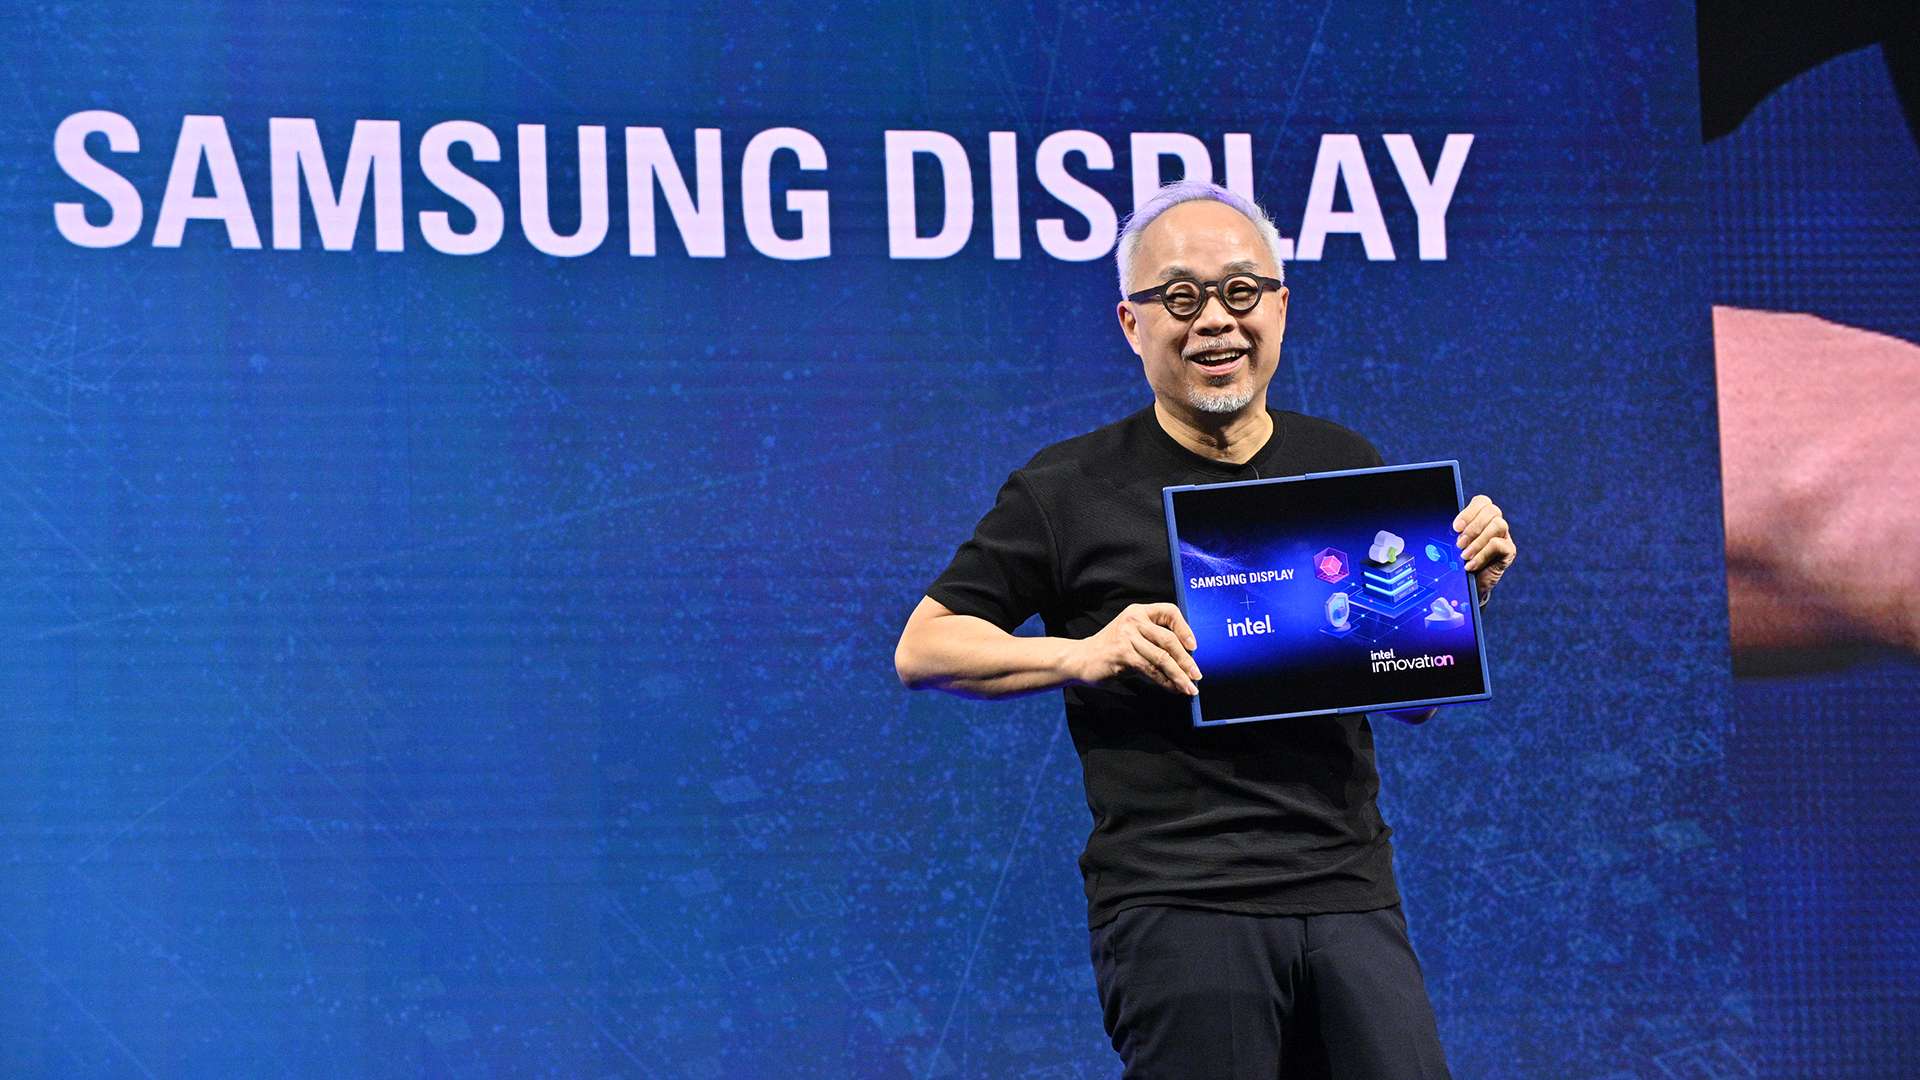 samsung-reveals-world-s-first-slidable-display-for-pcs